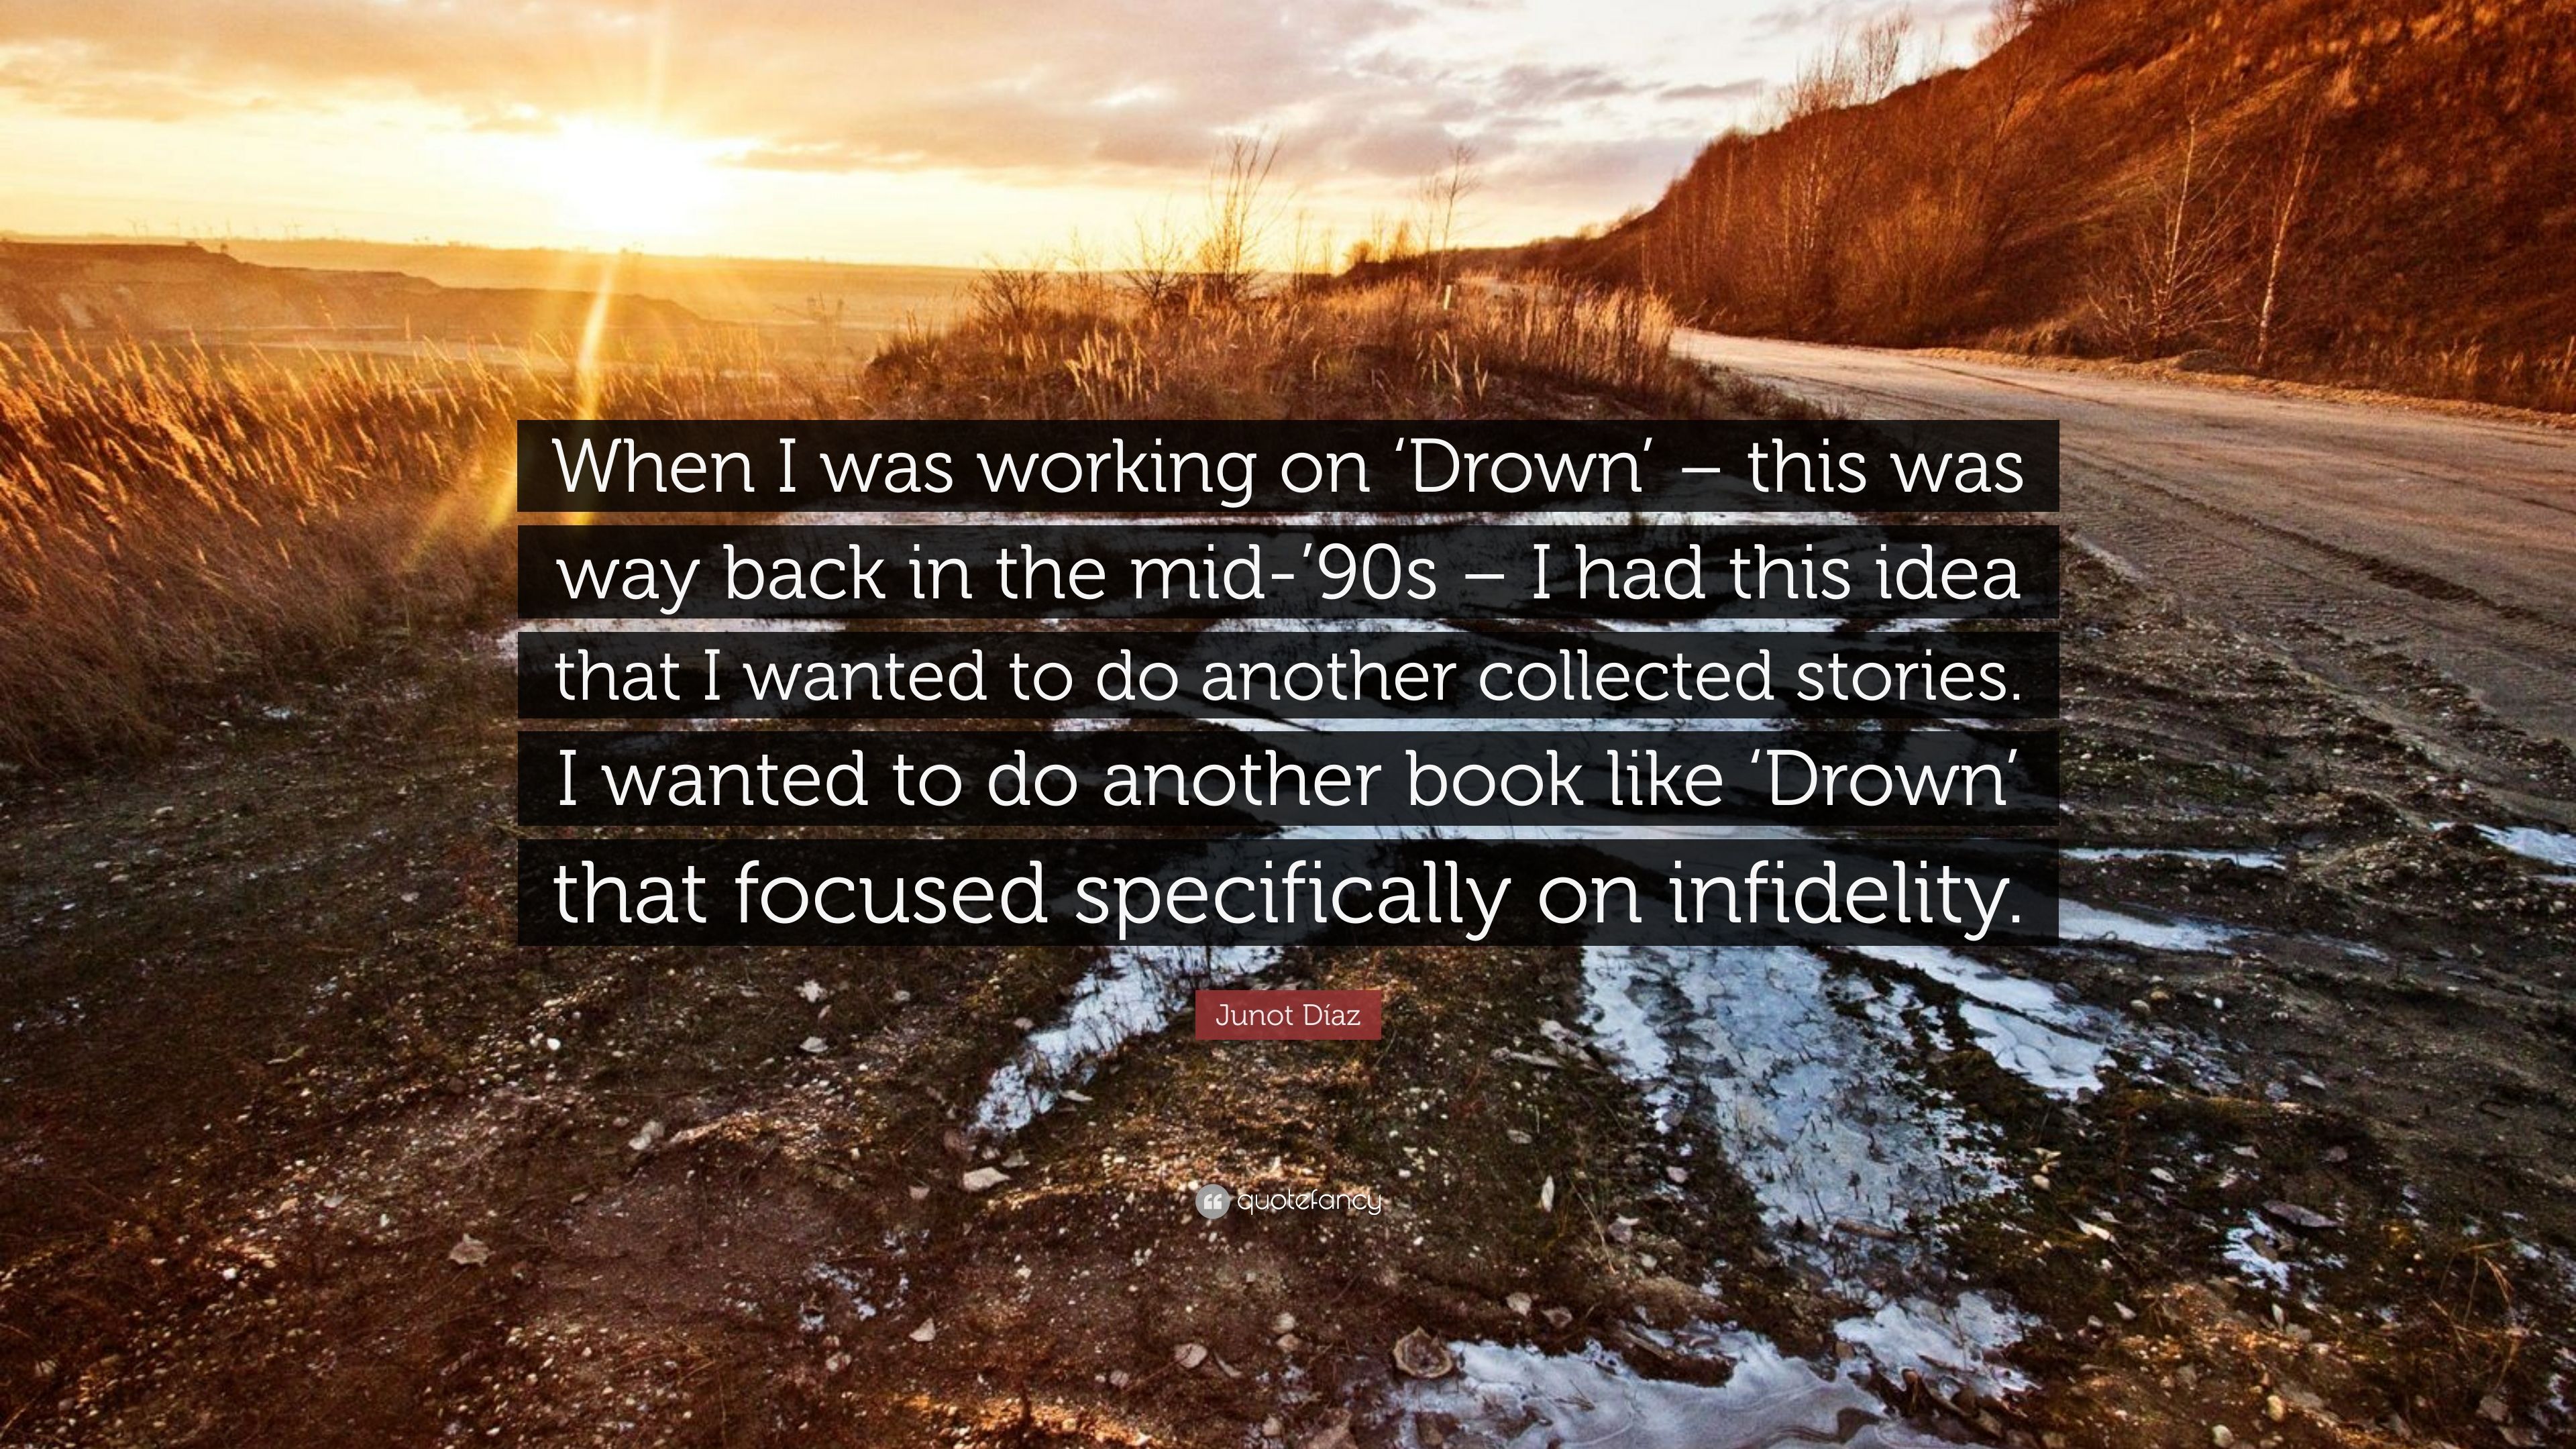 Junot Díaz Quote: “When I was working on 'Drown'